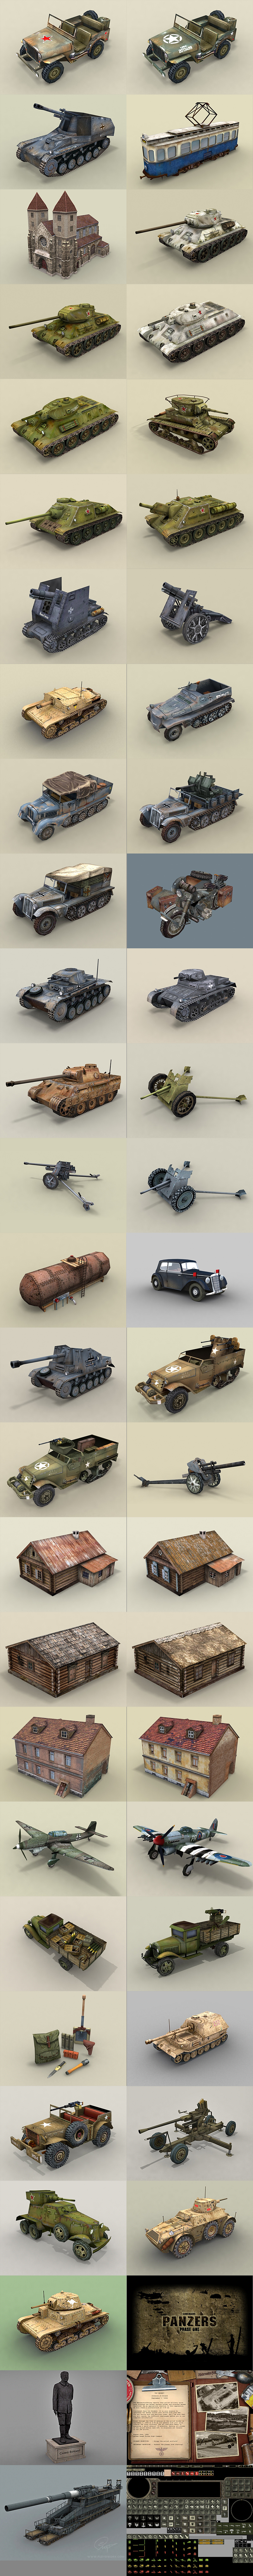 texture model 3D jeep Tank Unit fight War world rts game strategy time Real panzers